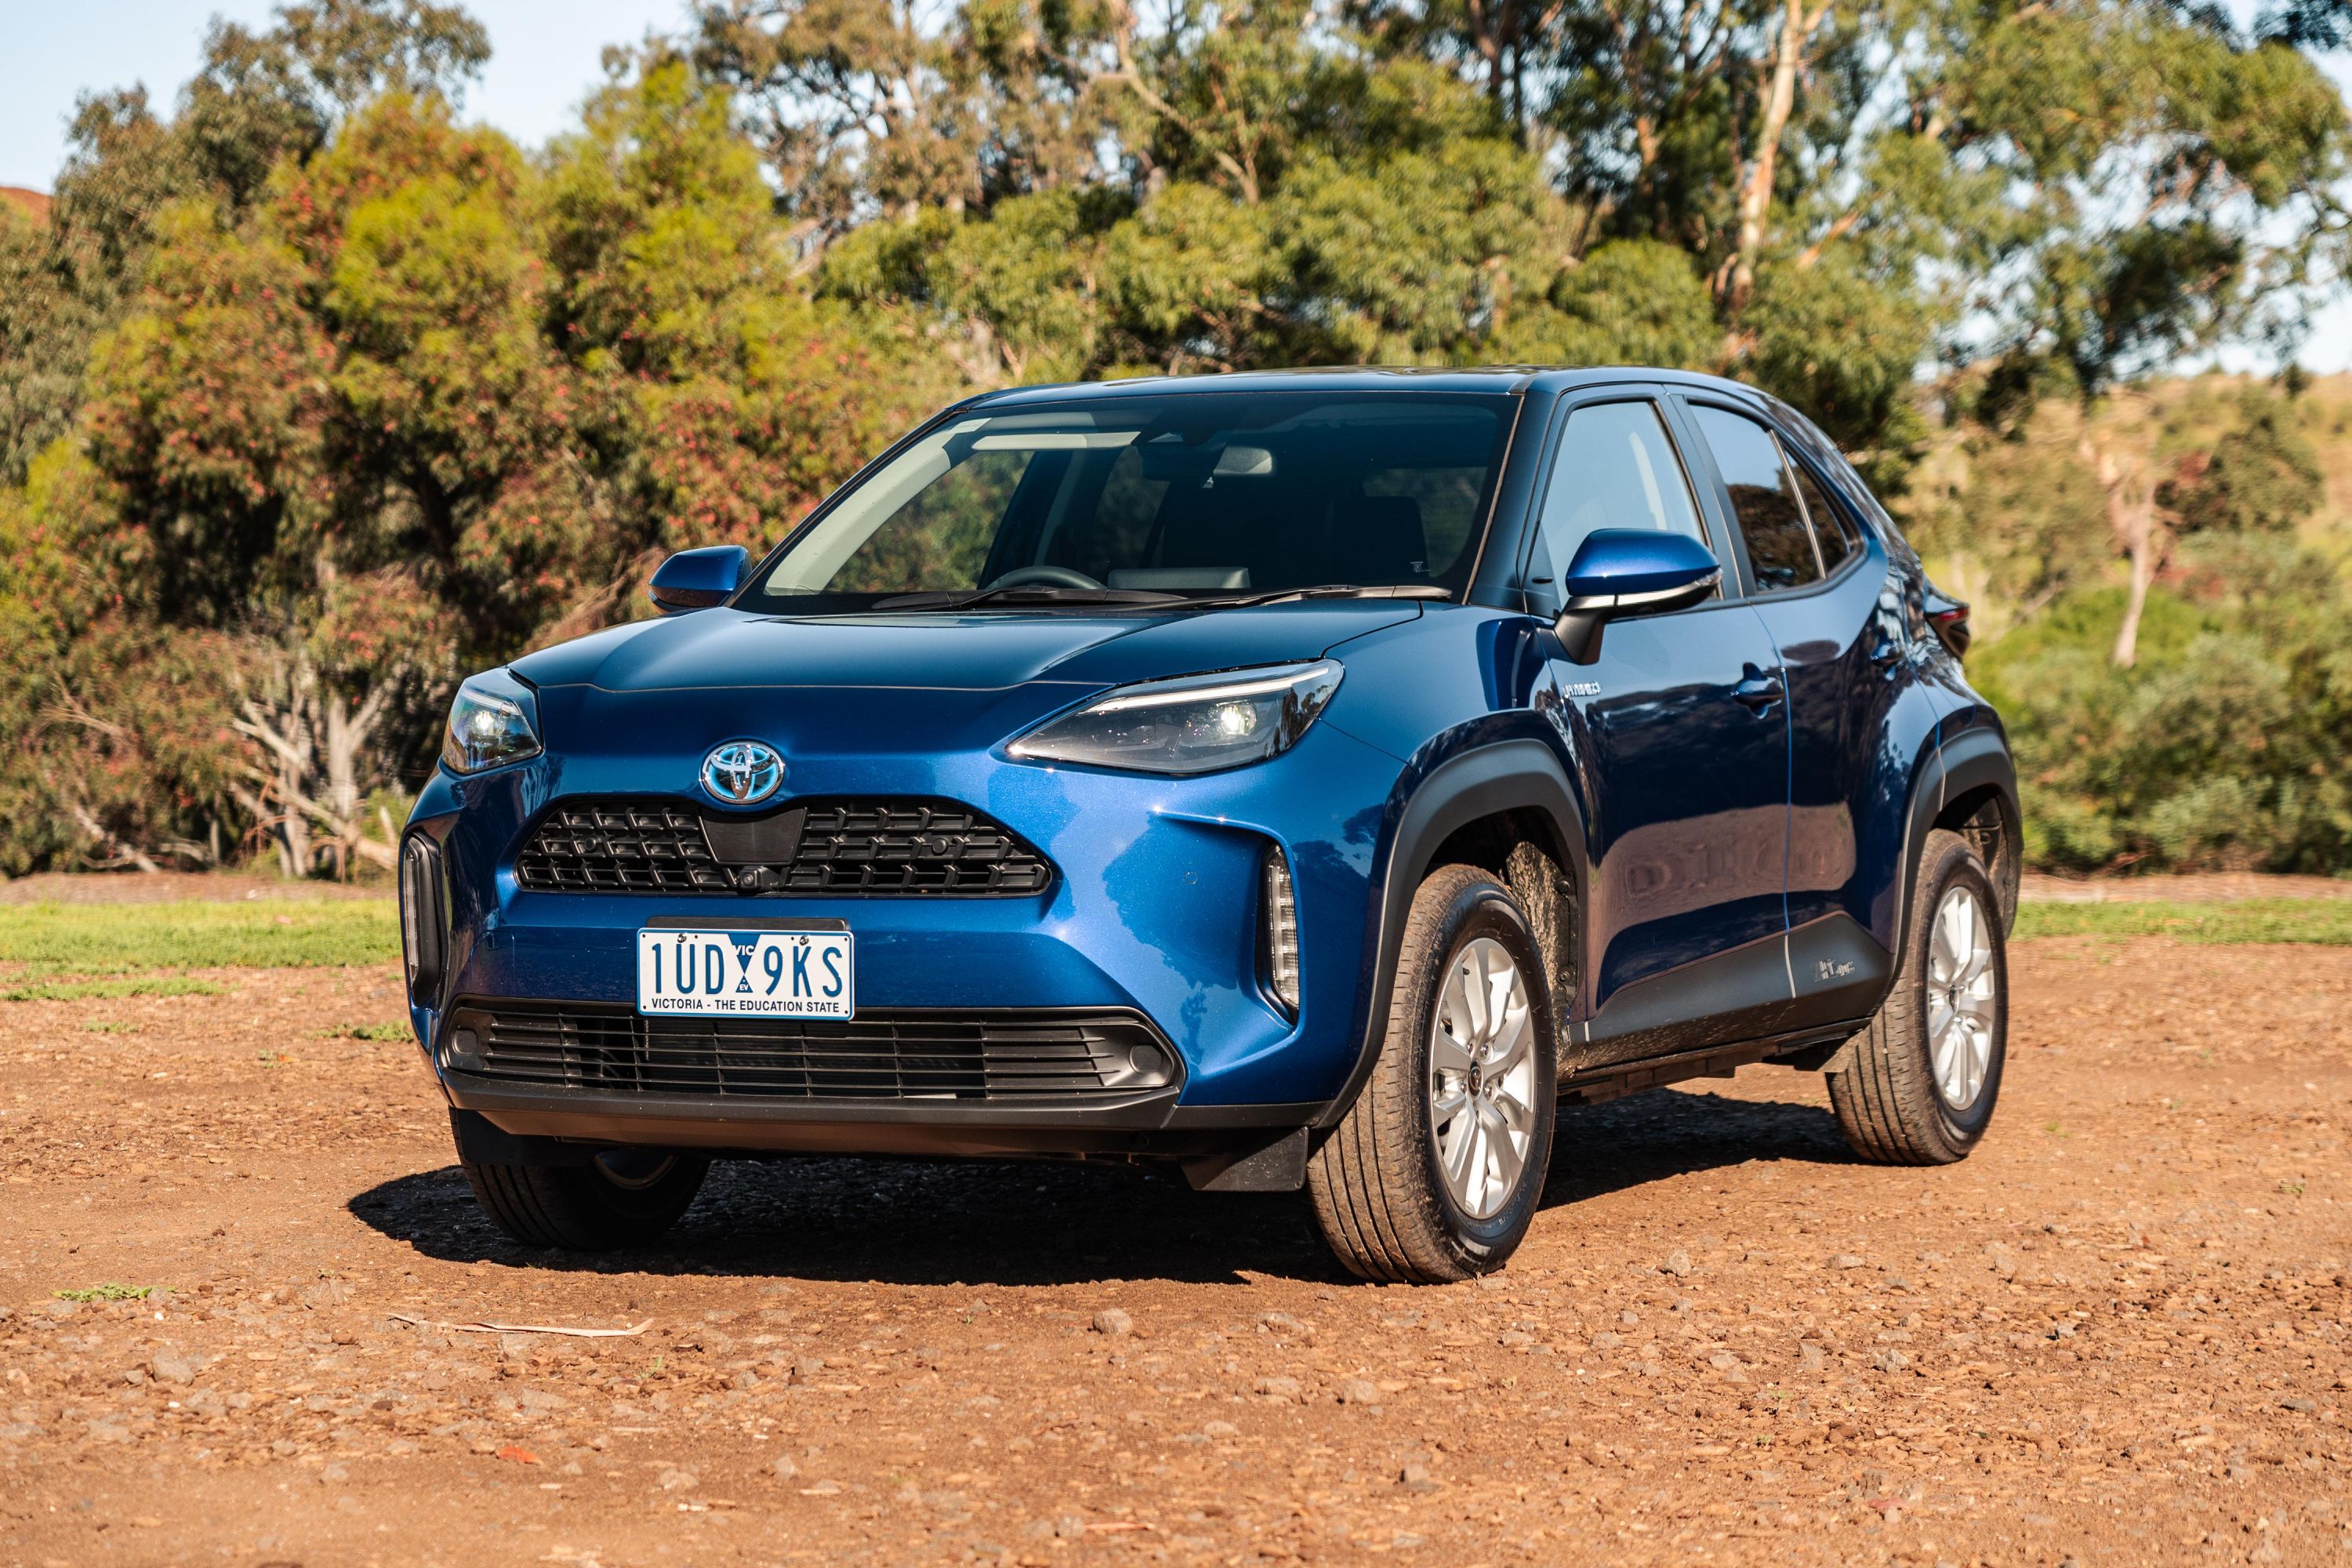 New Toyota Yaris Cross Hybrid Back picture, Rear view photo and Exterior  image